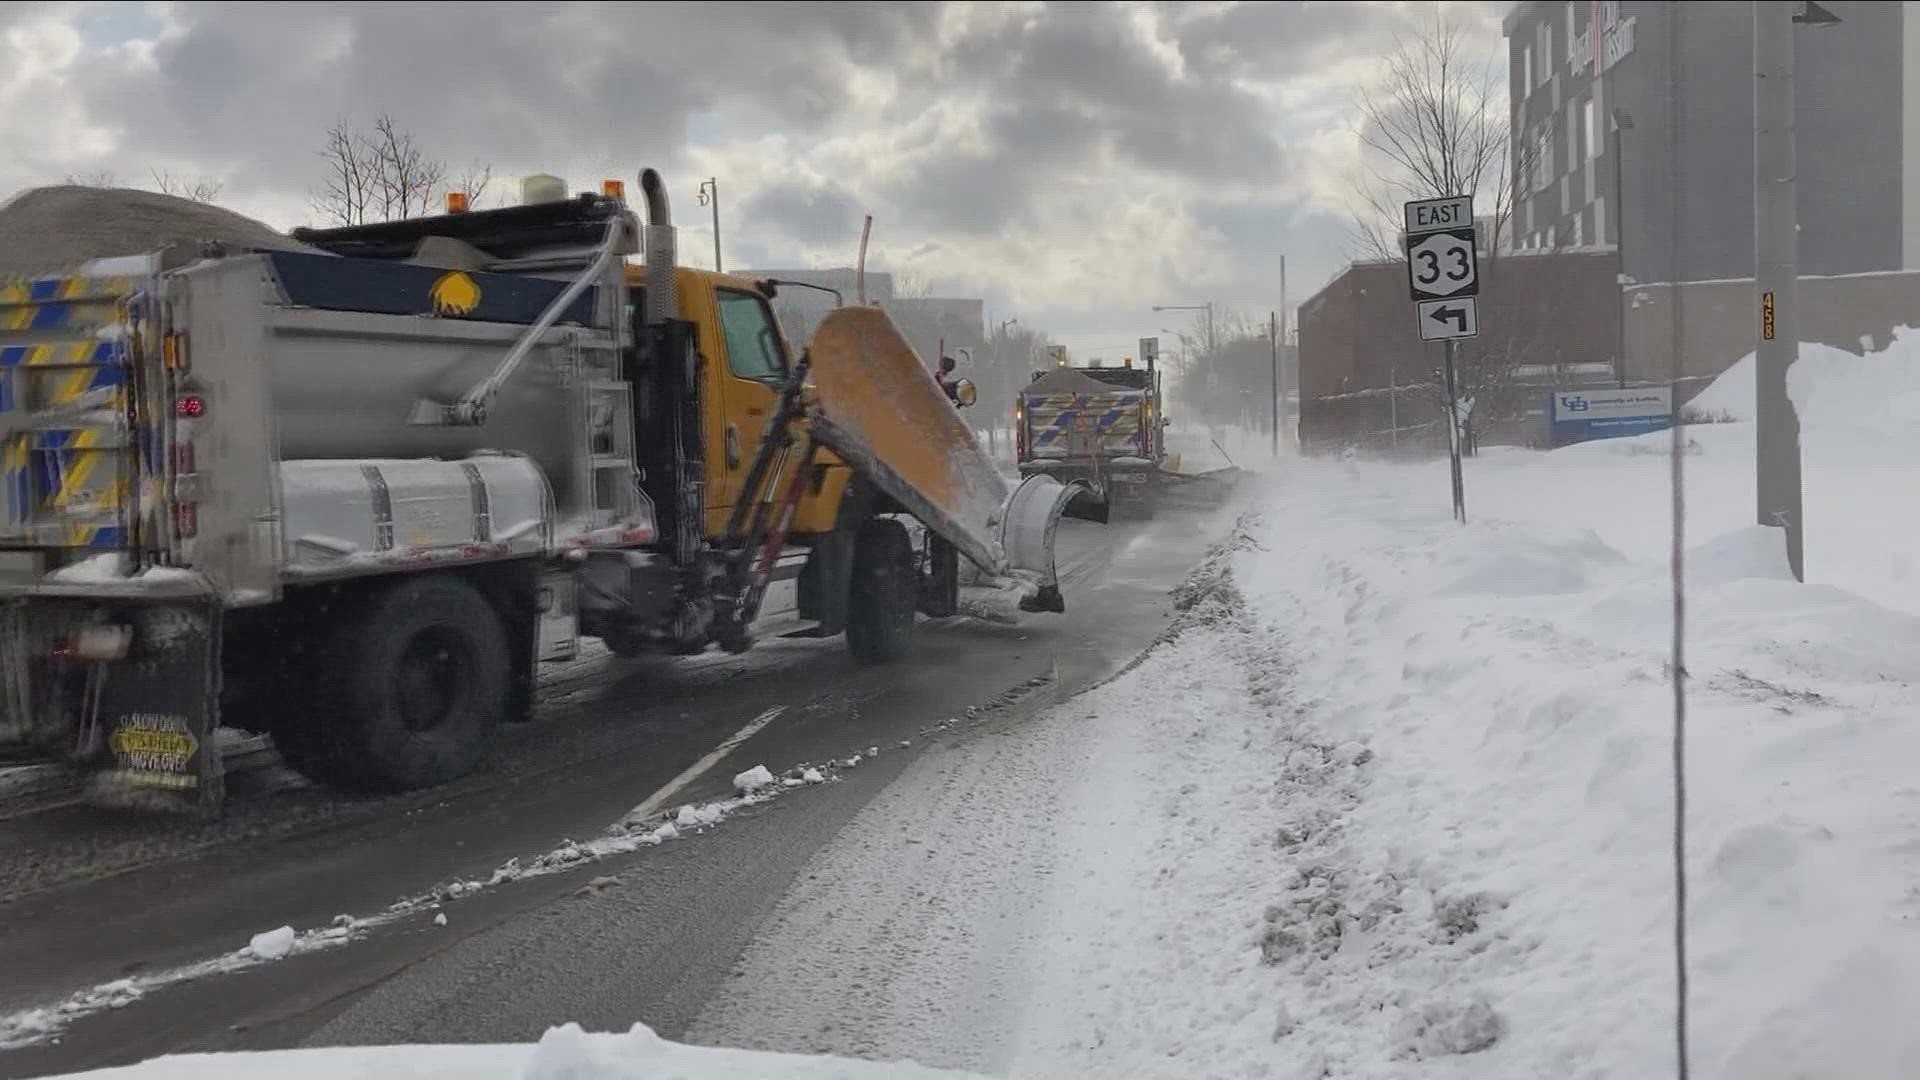 The county has 20 plows in the Southern Tier already and has 50 crews from the state on standby once snow begins falling in the rest of the county.